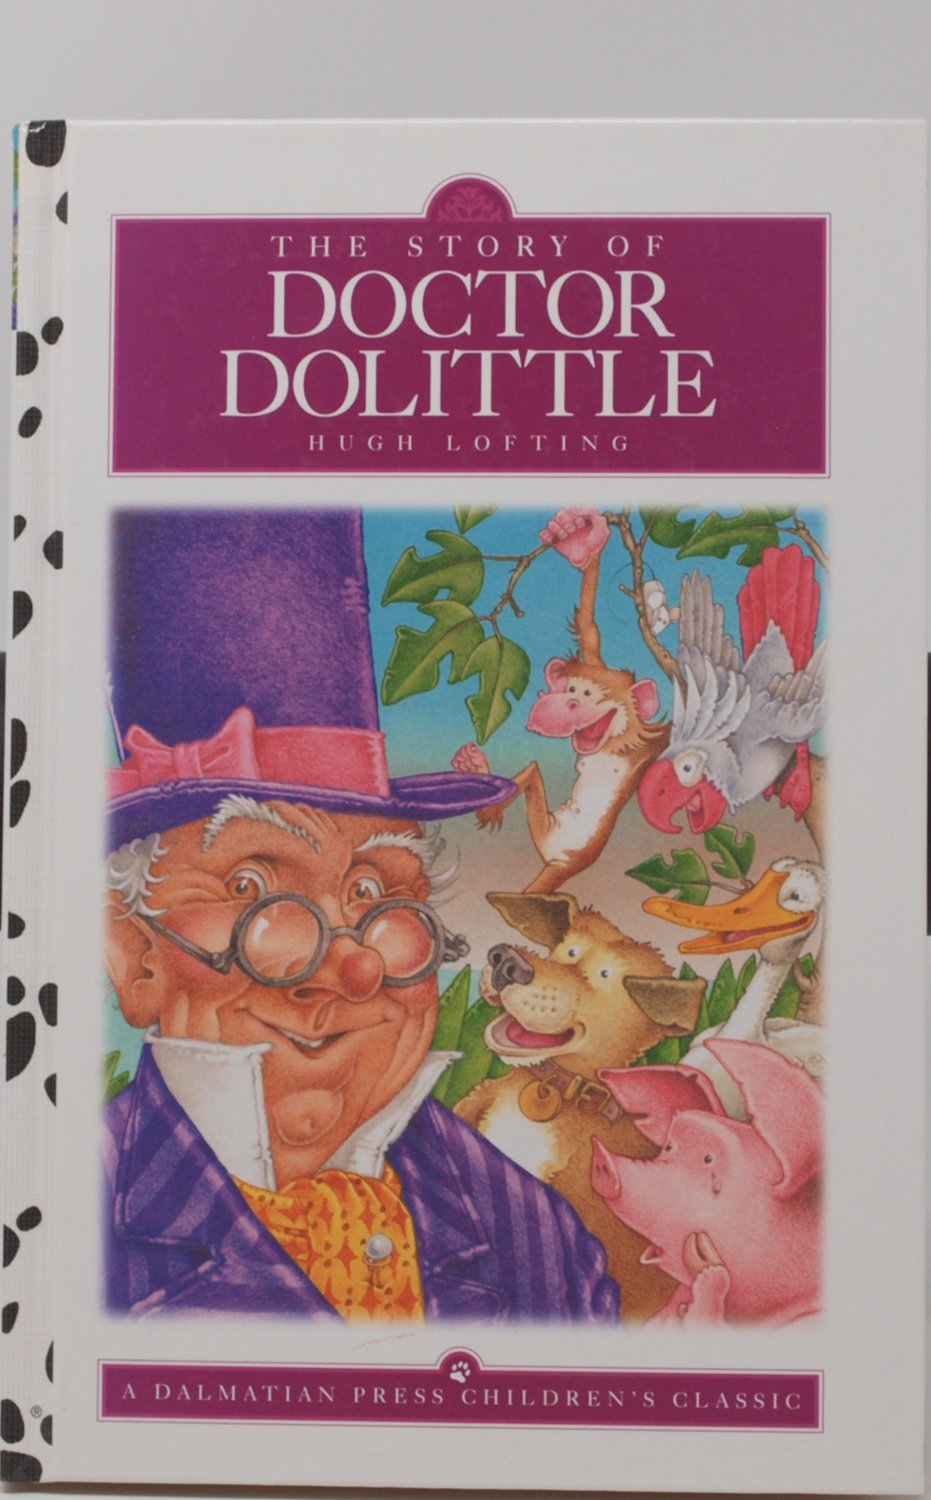 the story of doctor dolittle